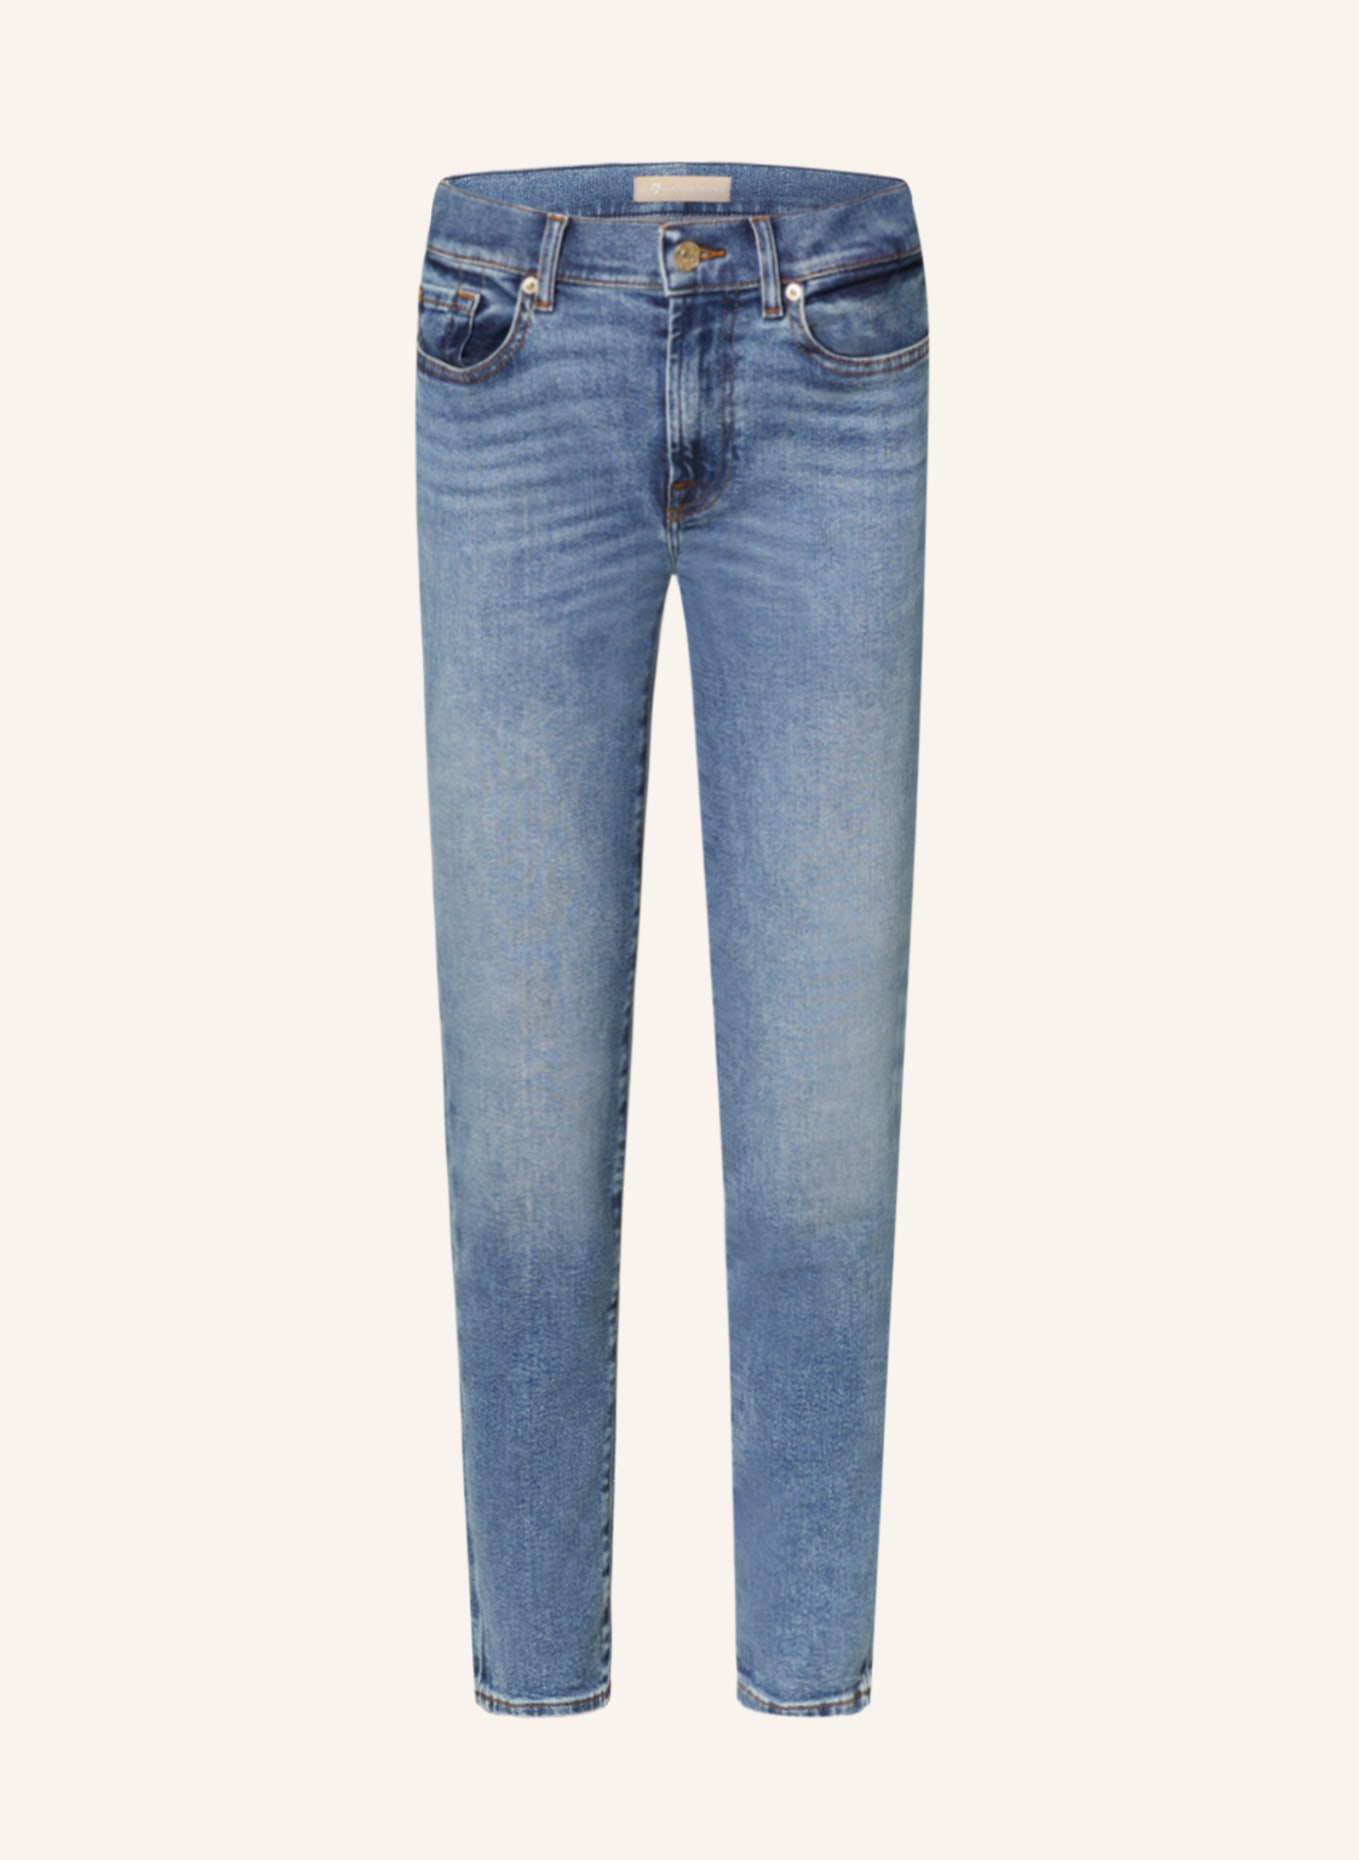 7 for all mankind Skinny Jeans ROXANNE LUXE VINTAGE, Farbe: MID BLUE (Bild 1)